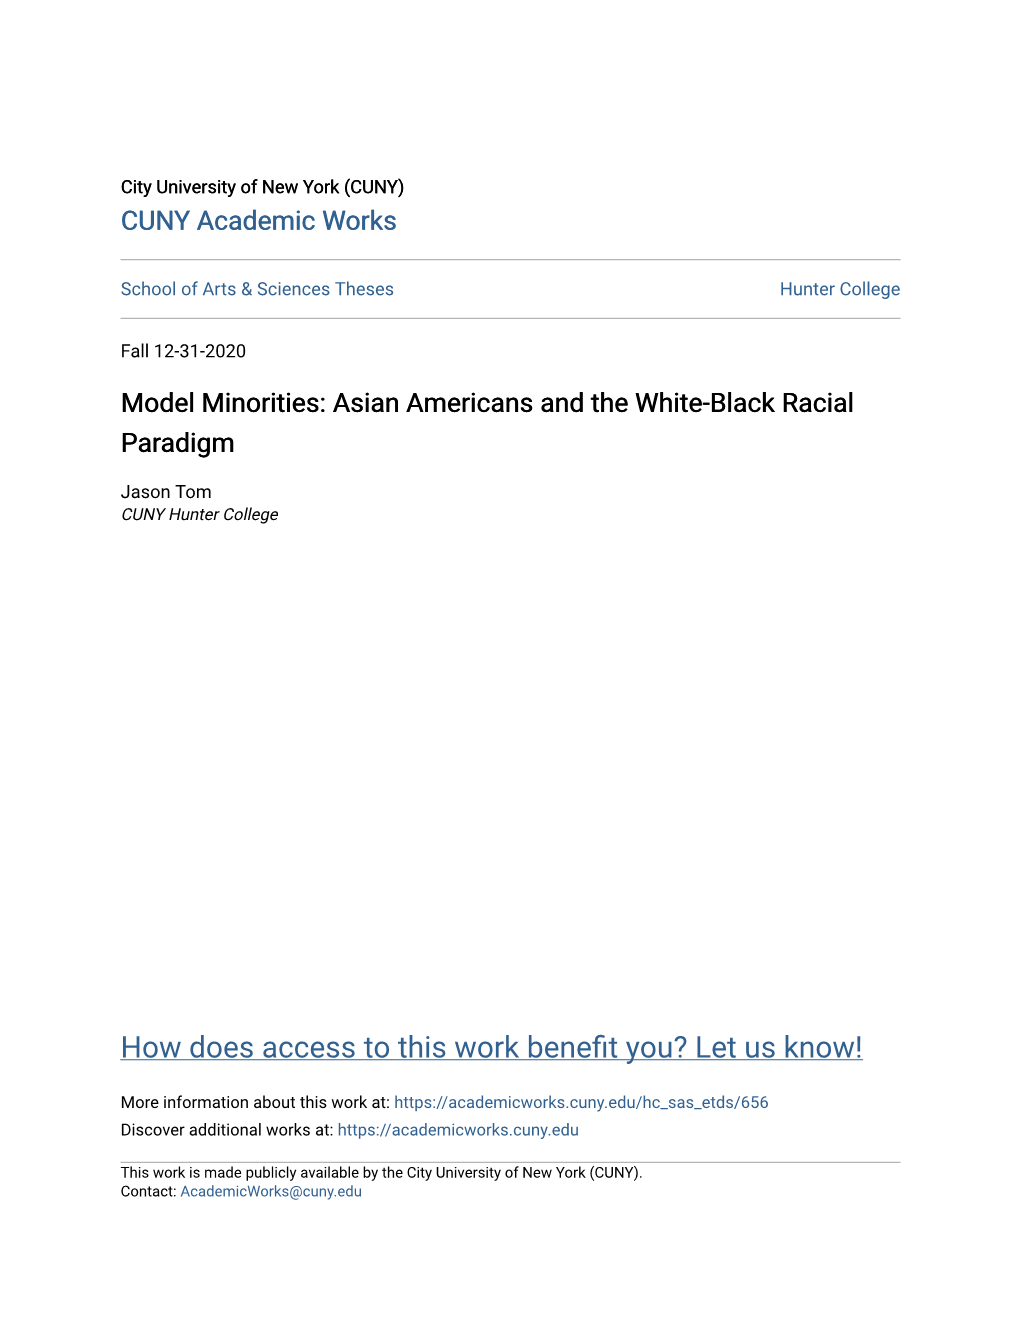 Asian Americans and the White-Black Racial Paradigm